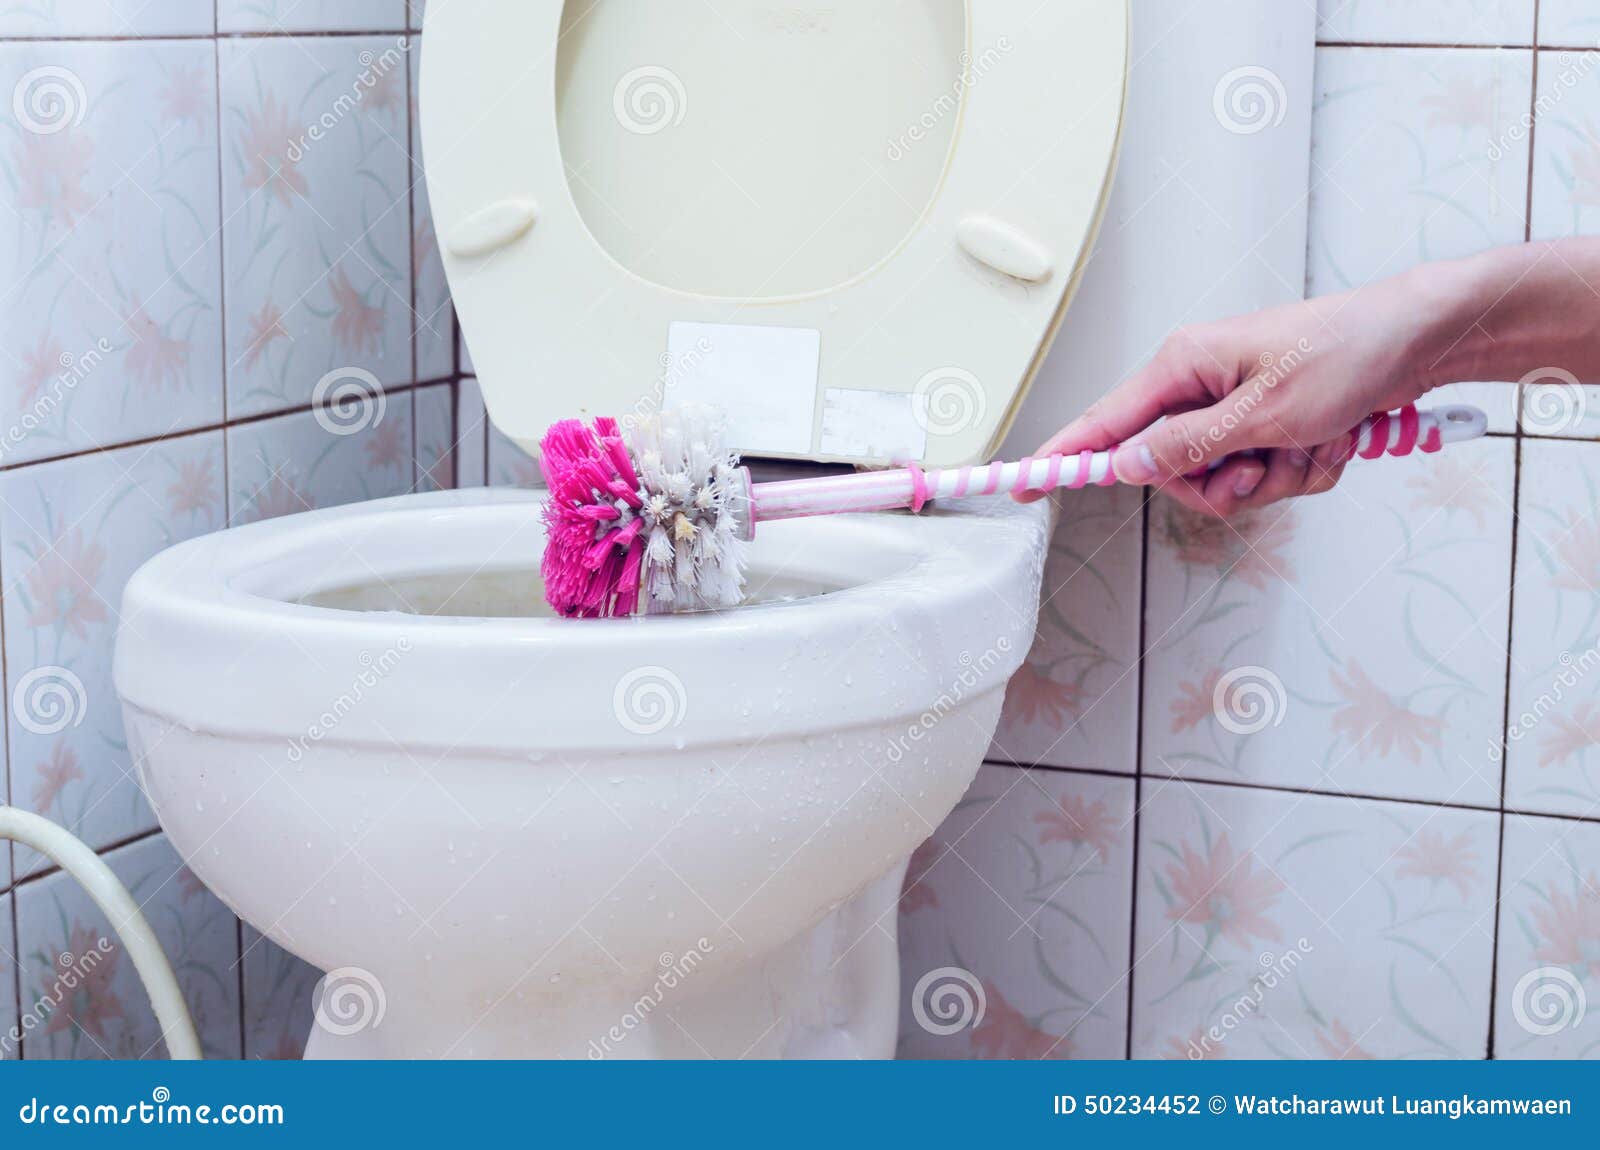 Cleaning toilet in the morning